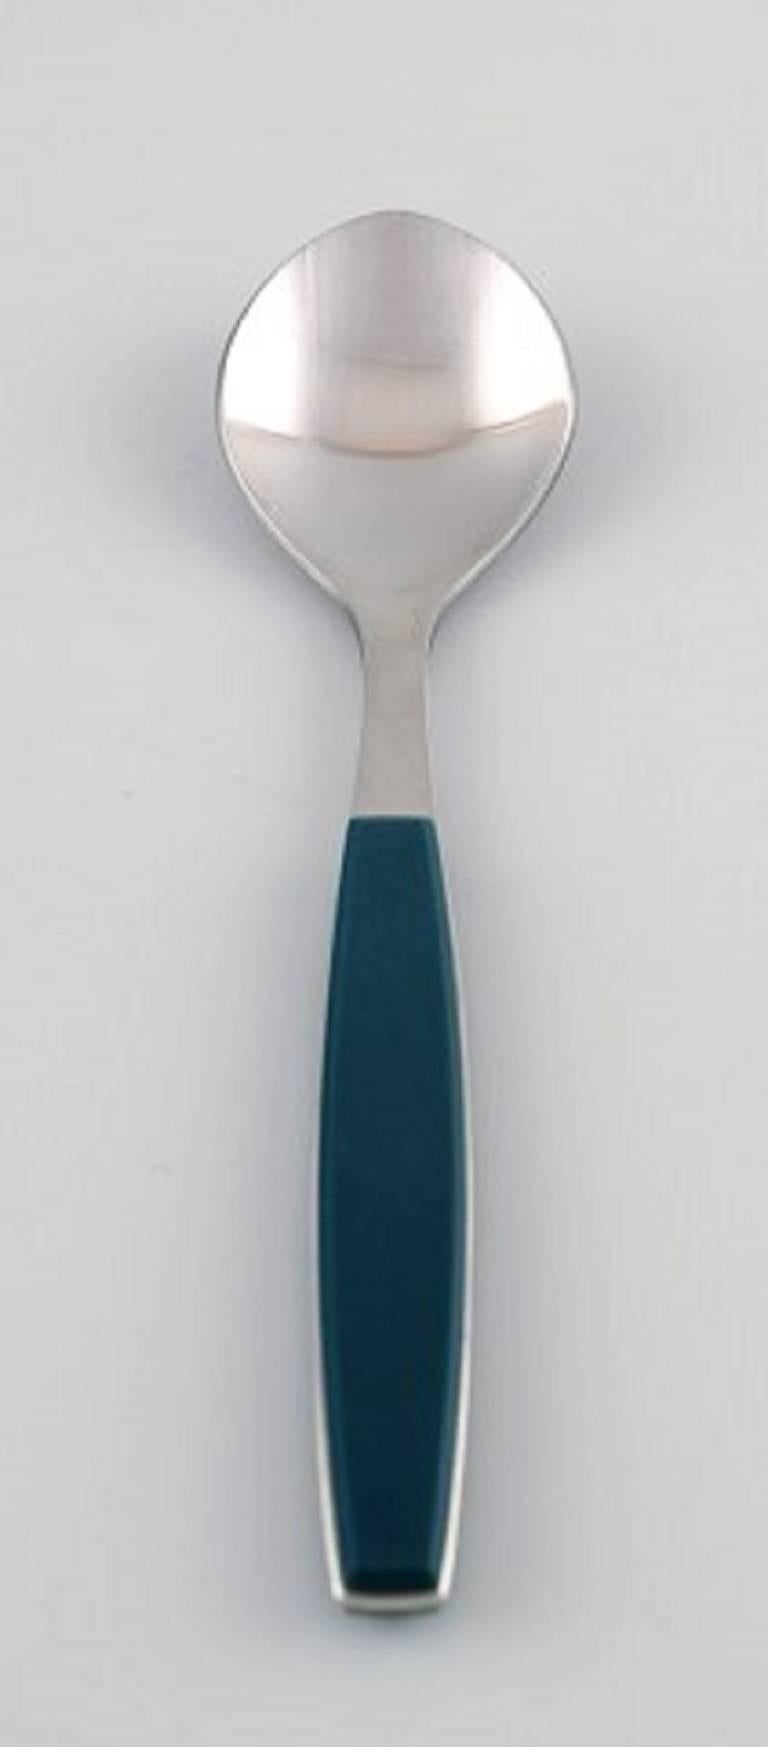 Scandinavian Modern Complete Service for 6 P., Henning Koppel. Stainless Steel and Green Plastic